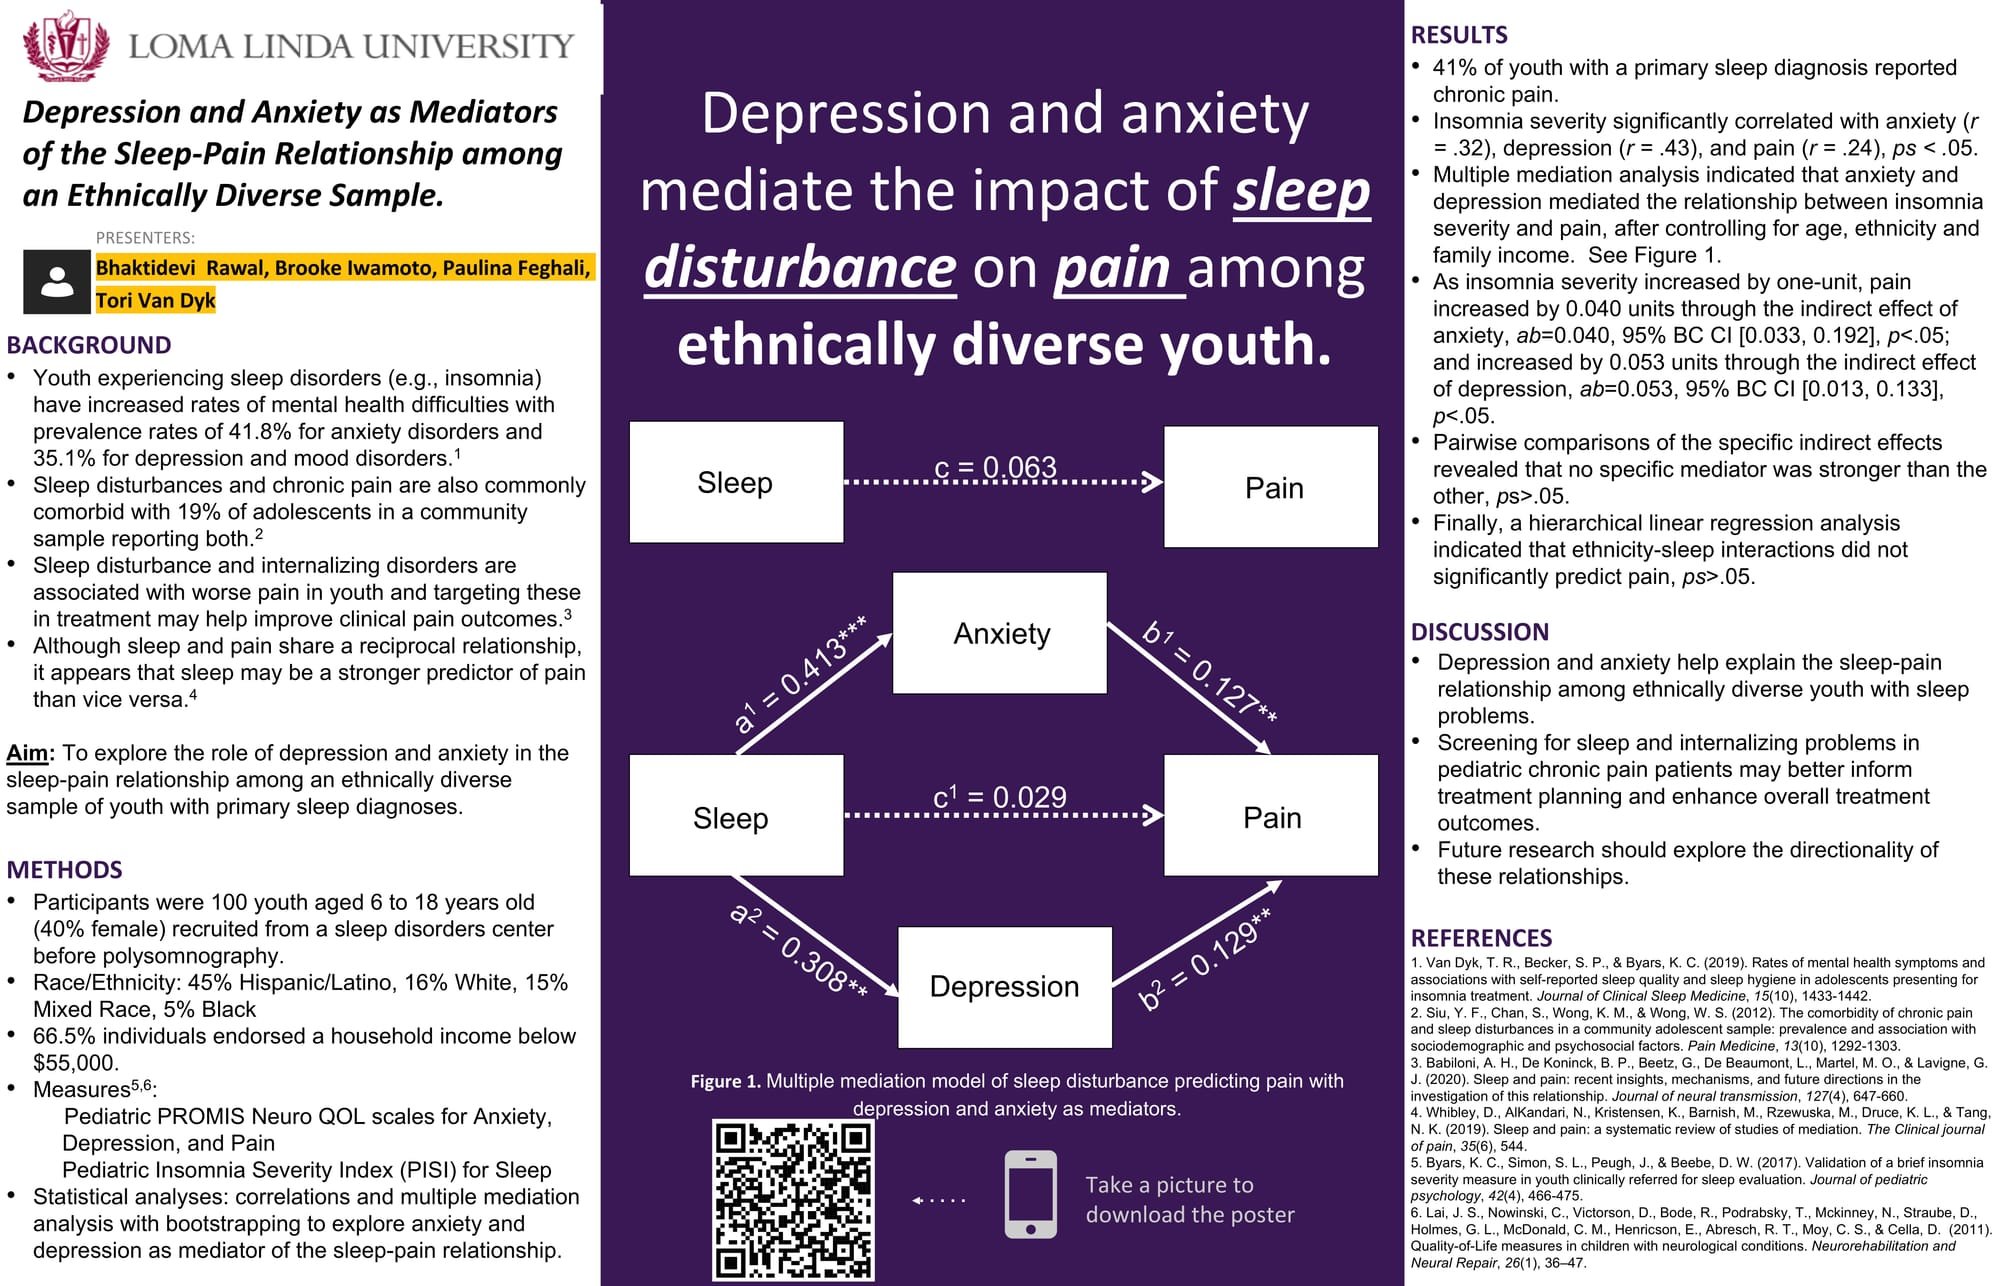 Depression and Anxiety as mediators of the Sleep-Pain Relationship among an Ethnically Diverse Sample